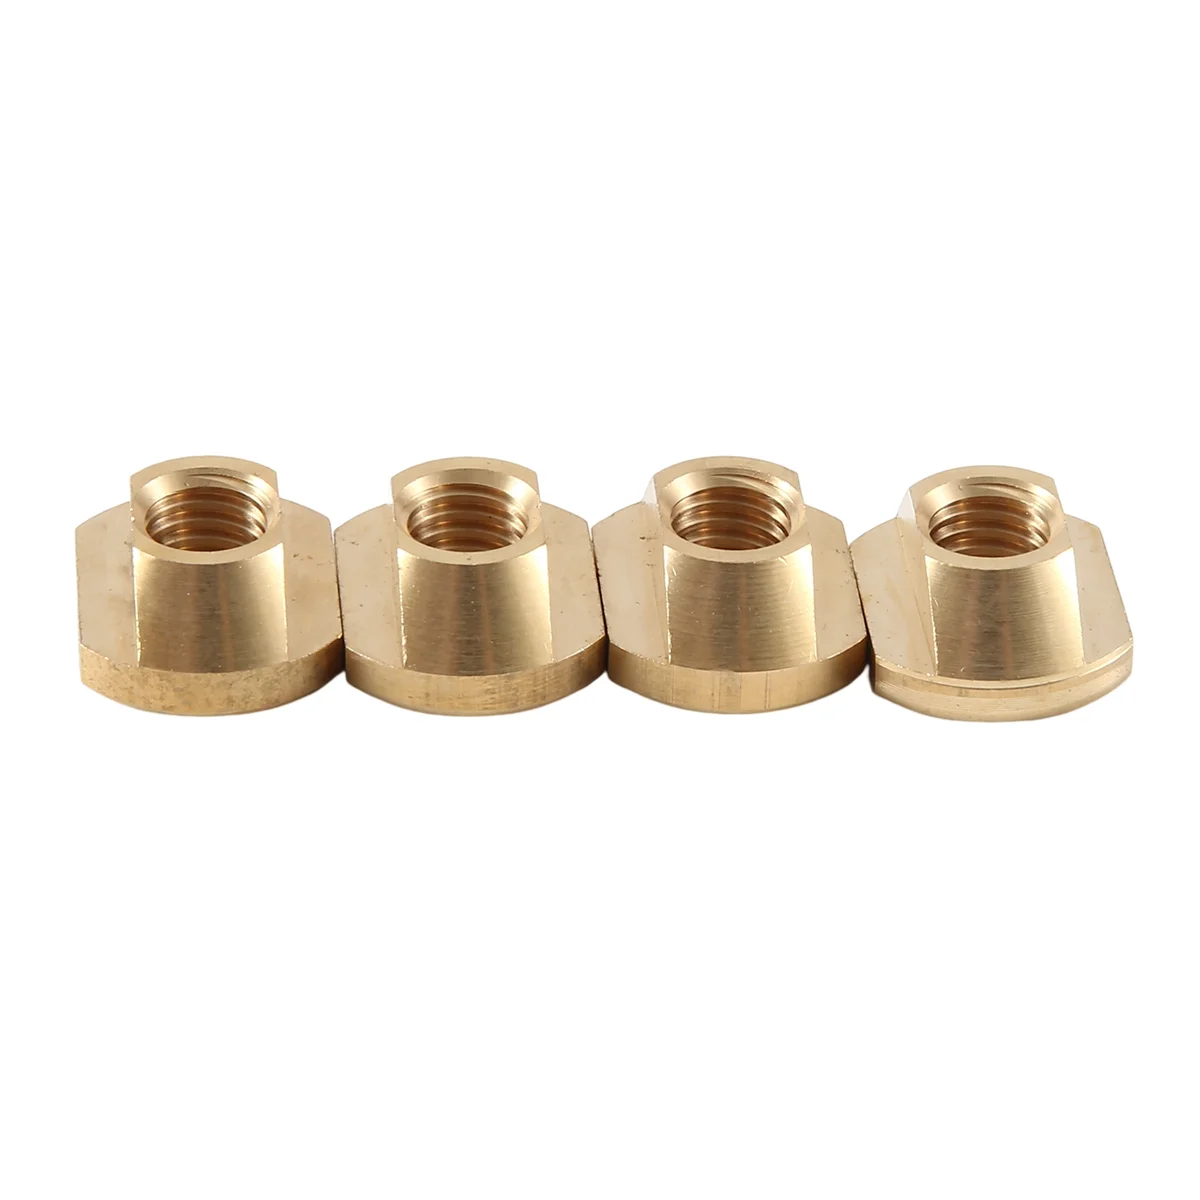 

4 PCS FoilMount Size M8 Hydrofoil Mounting T-Nuts for All Hydrofoil Tracks Surfing Outdoor Accessories